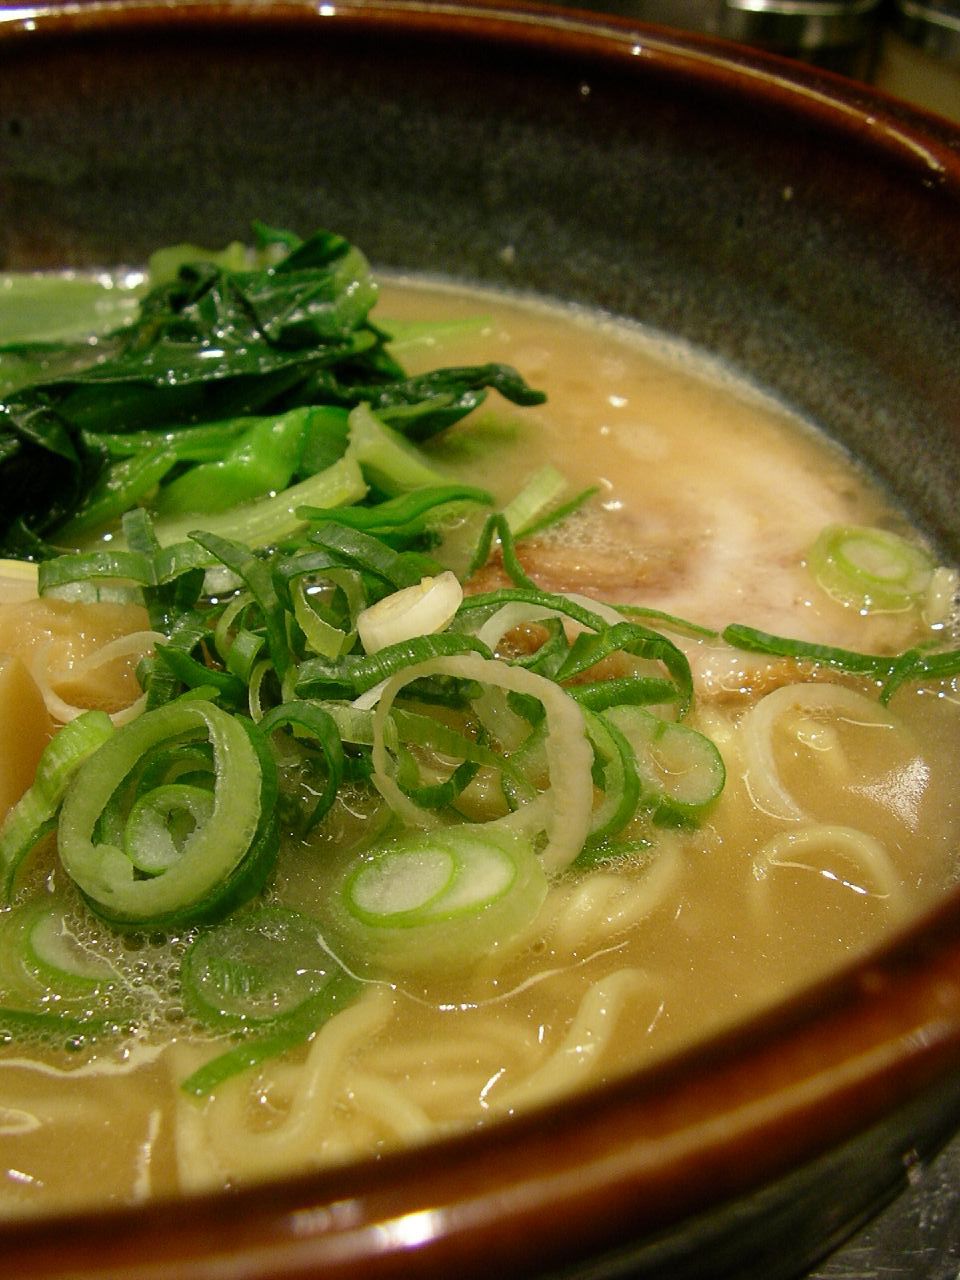 a close up view of some noodles and vegetables